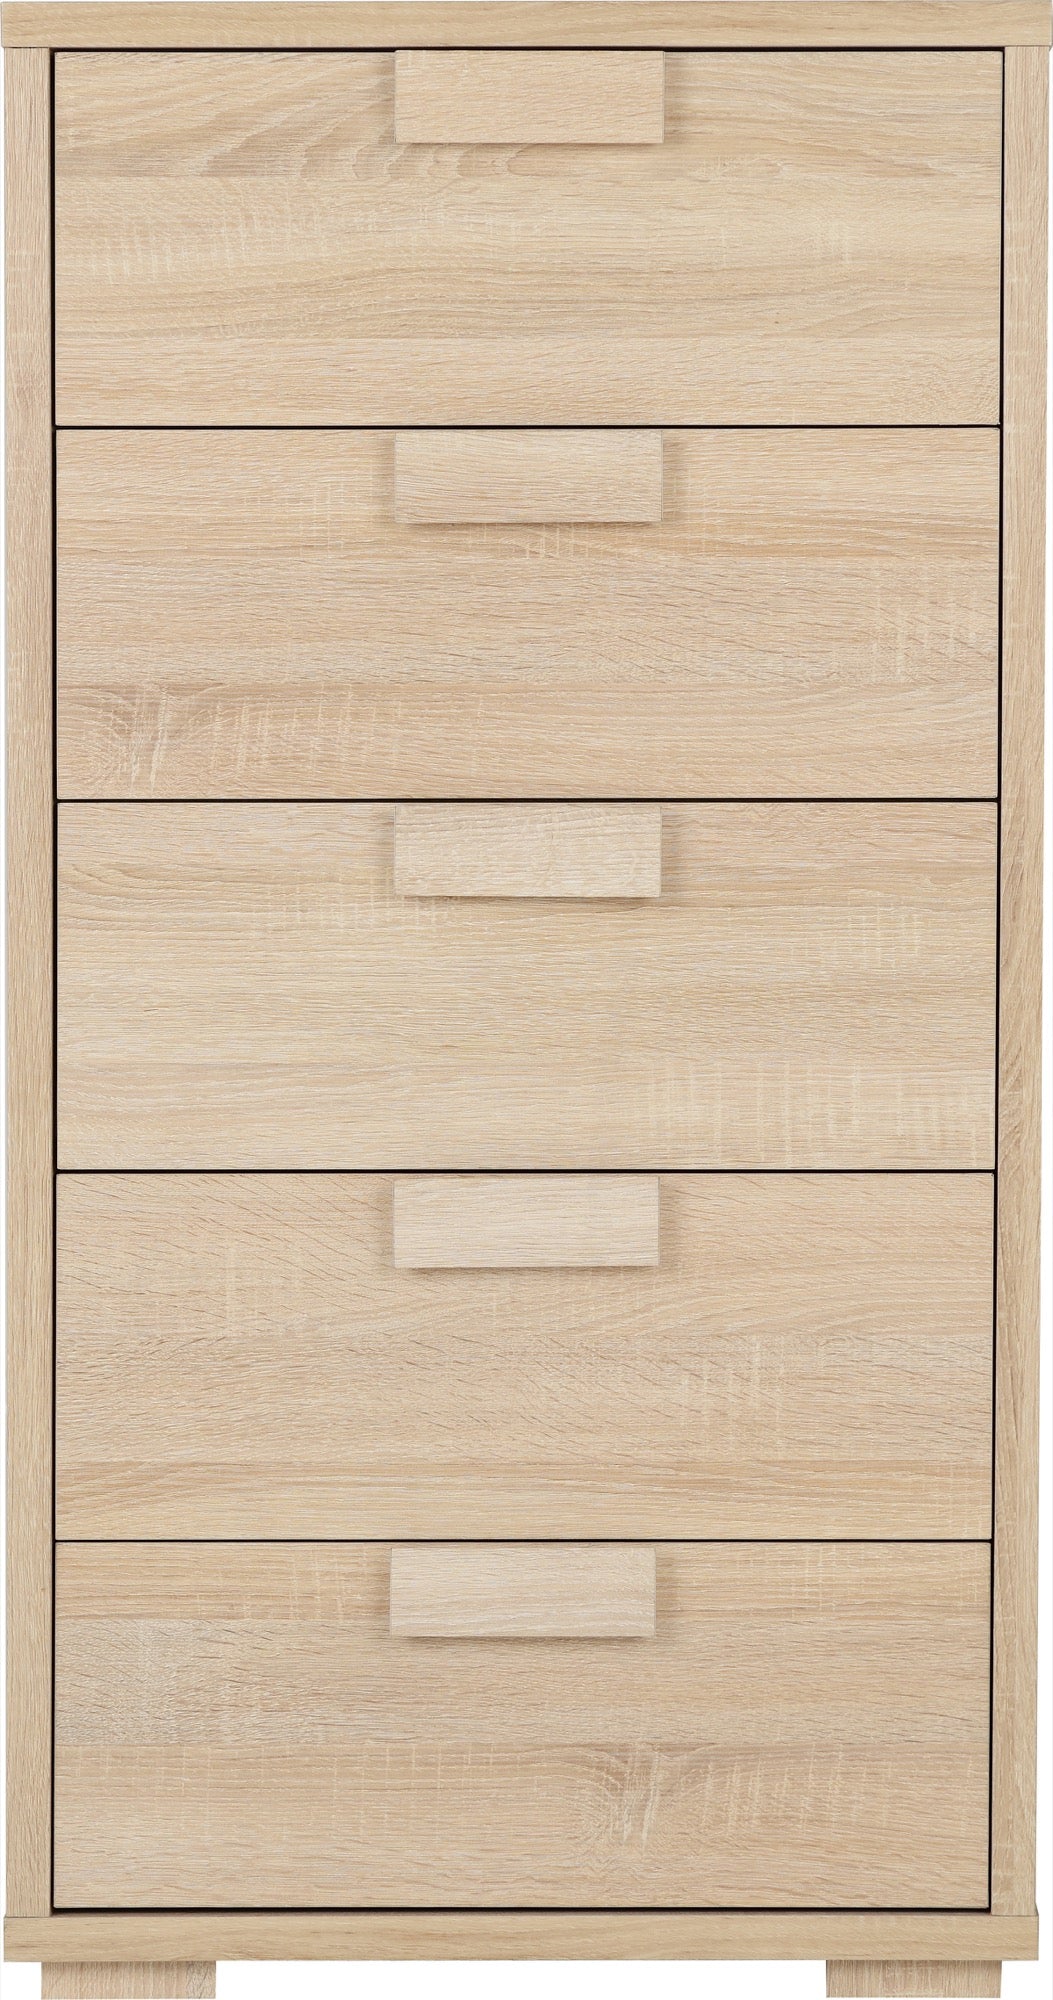 Cambourne 5 Drawer Chest - Sonoma Oak Effect - The Right Buy Store